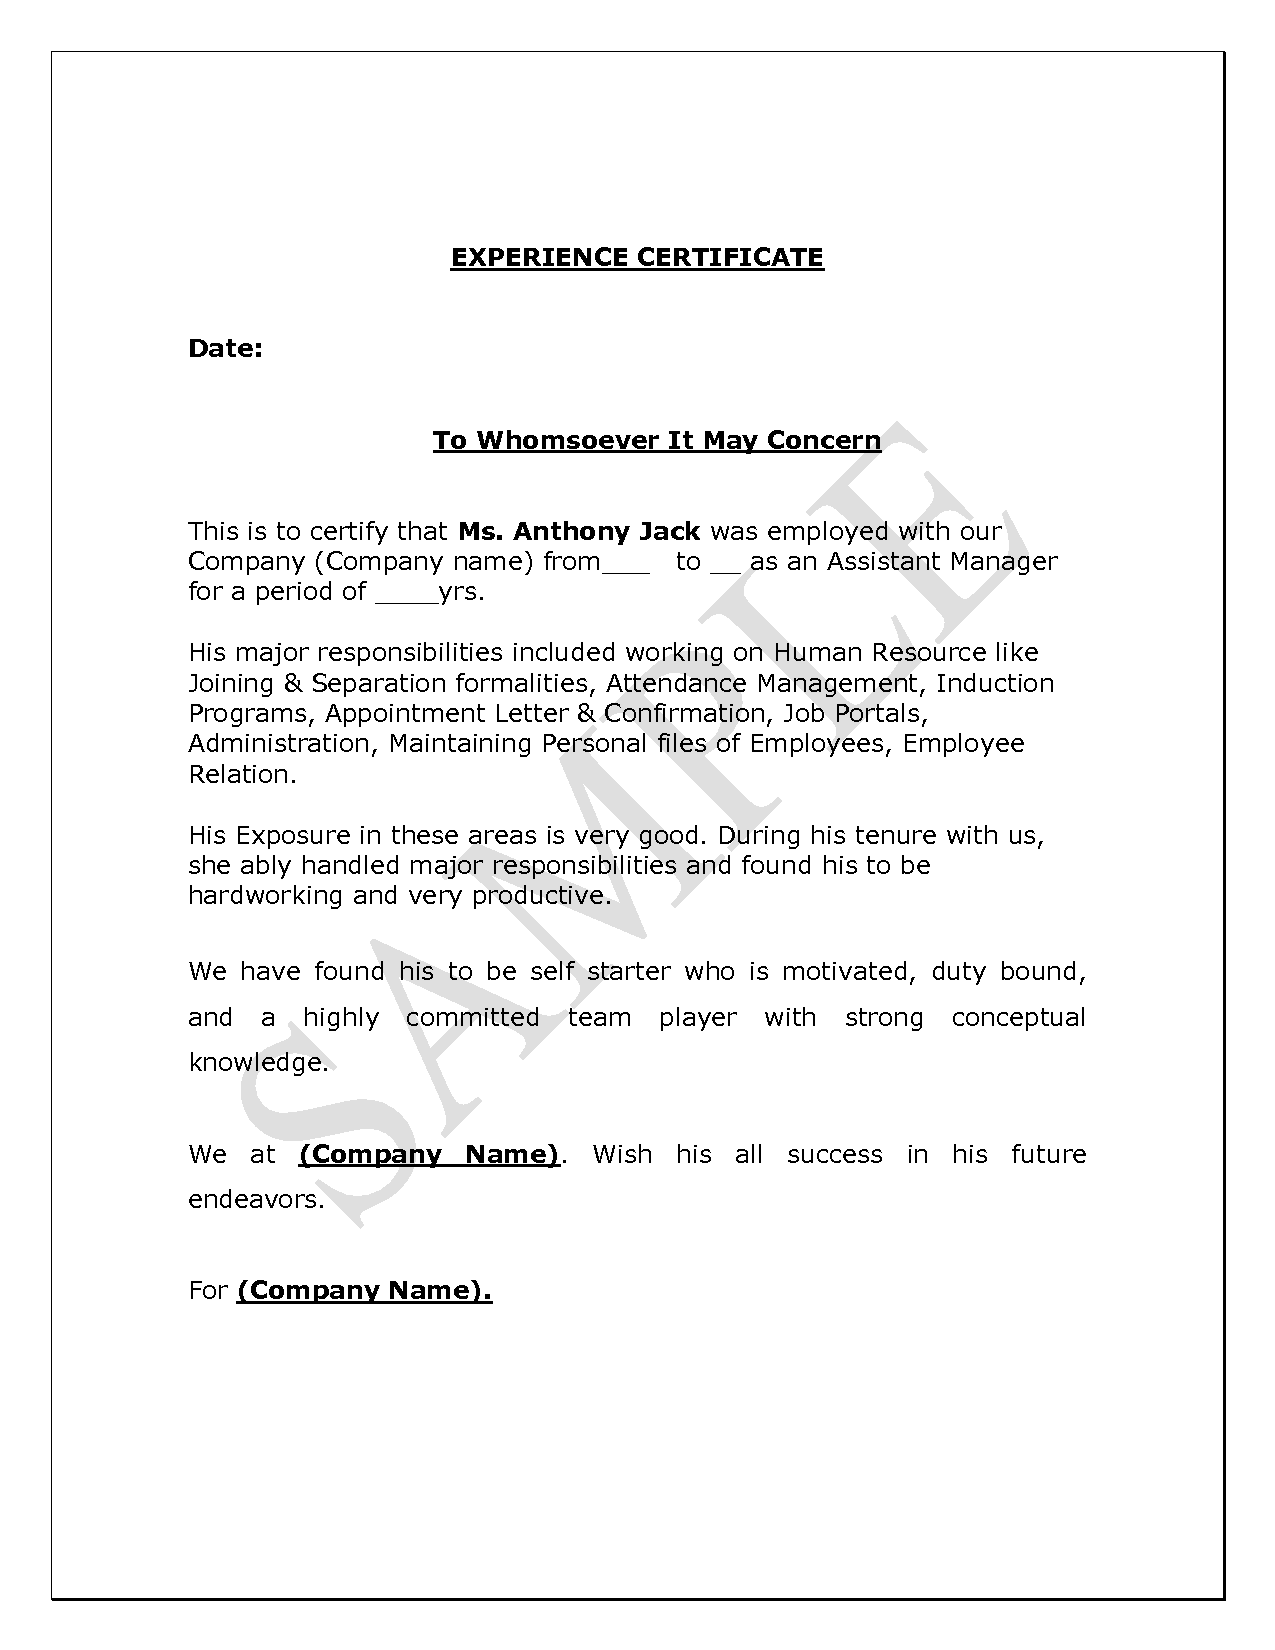 experience certificate mall experience certificate format